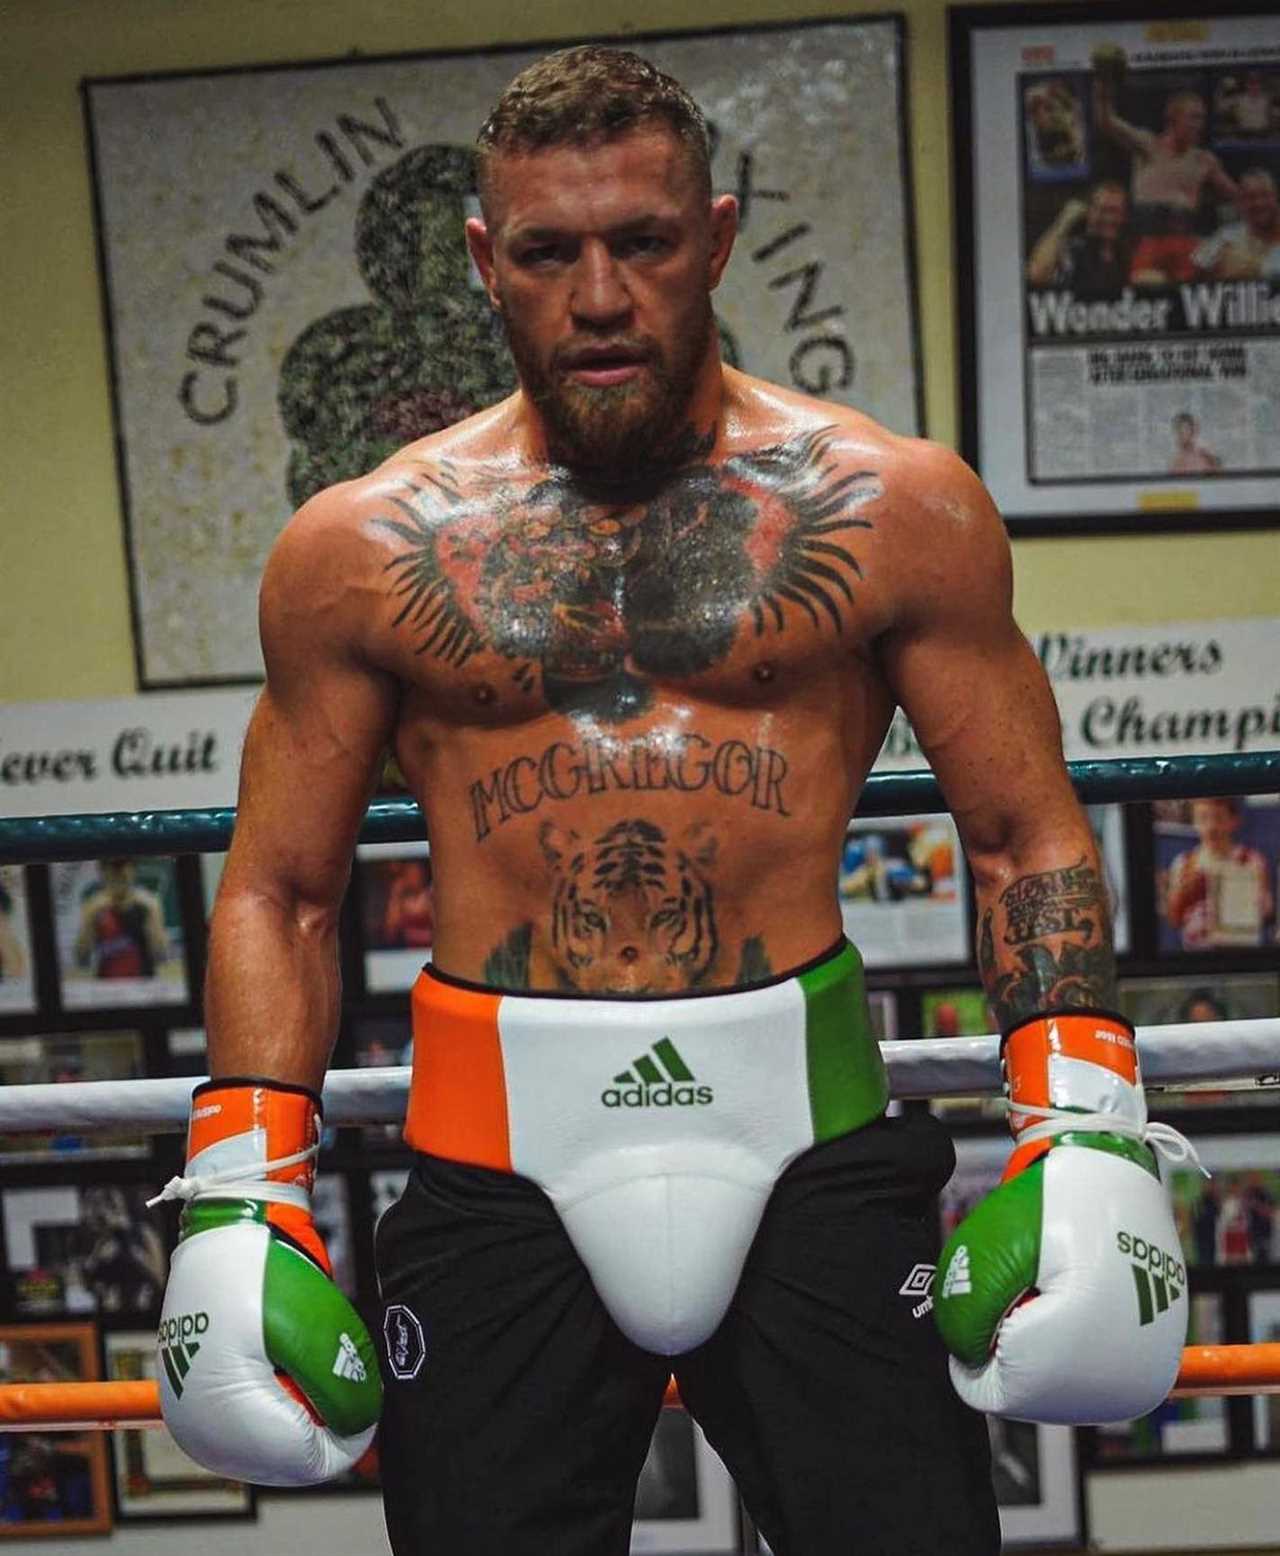 Conor McGregor is looking jacked as he resumes MMA training at SBG Ireland in advance of the blockbuster UFC Return